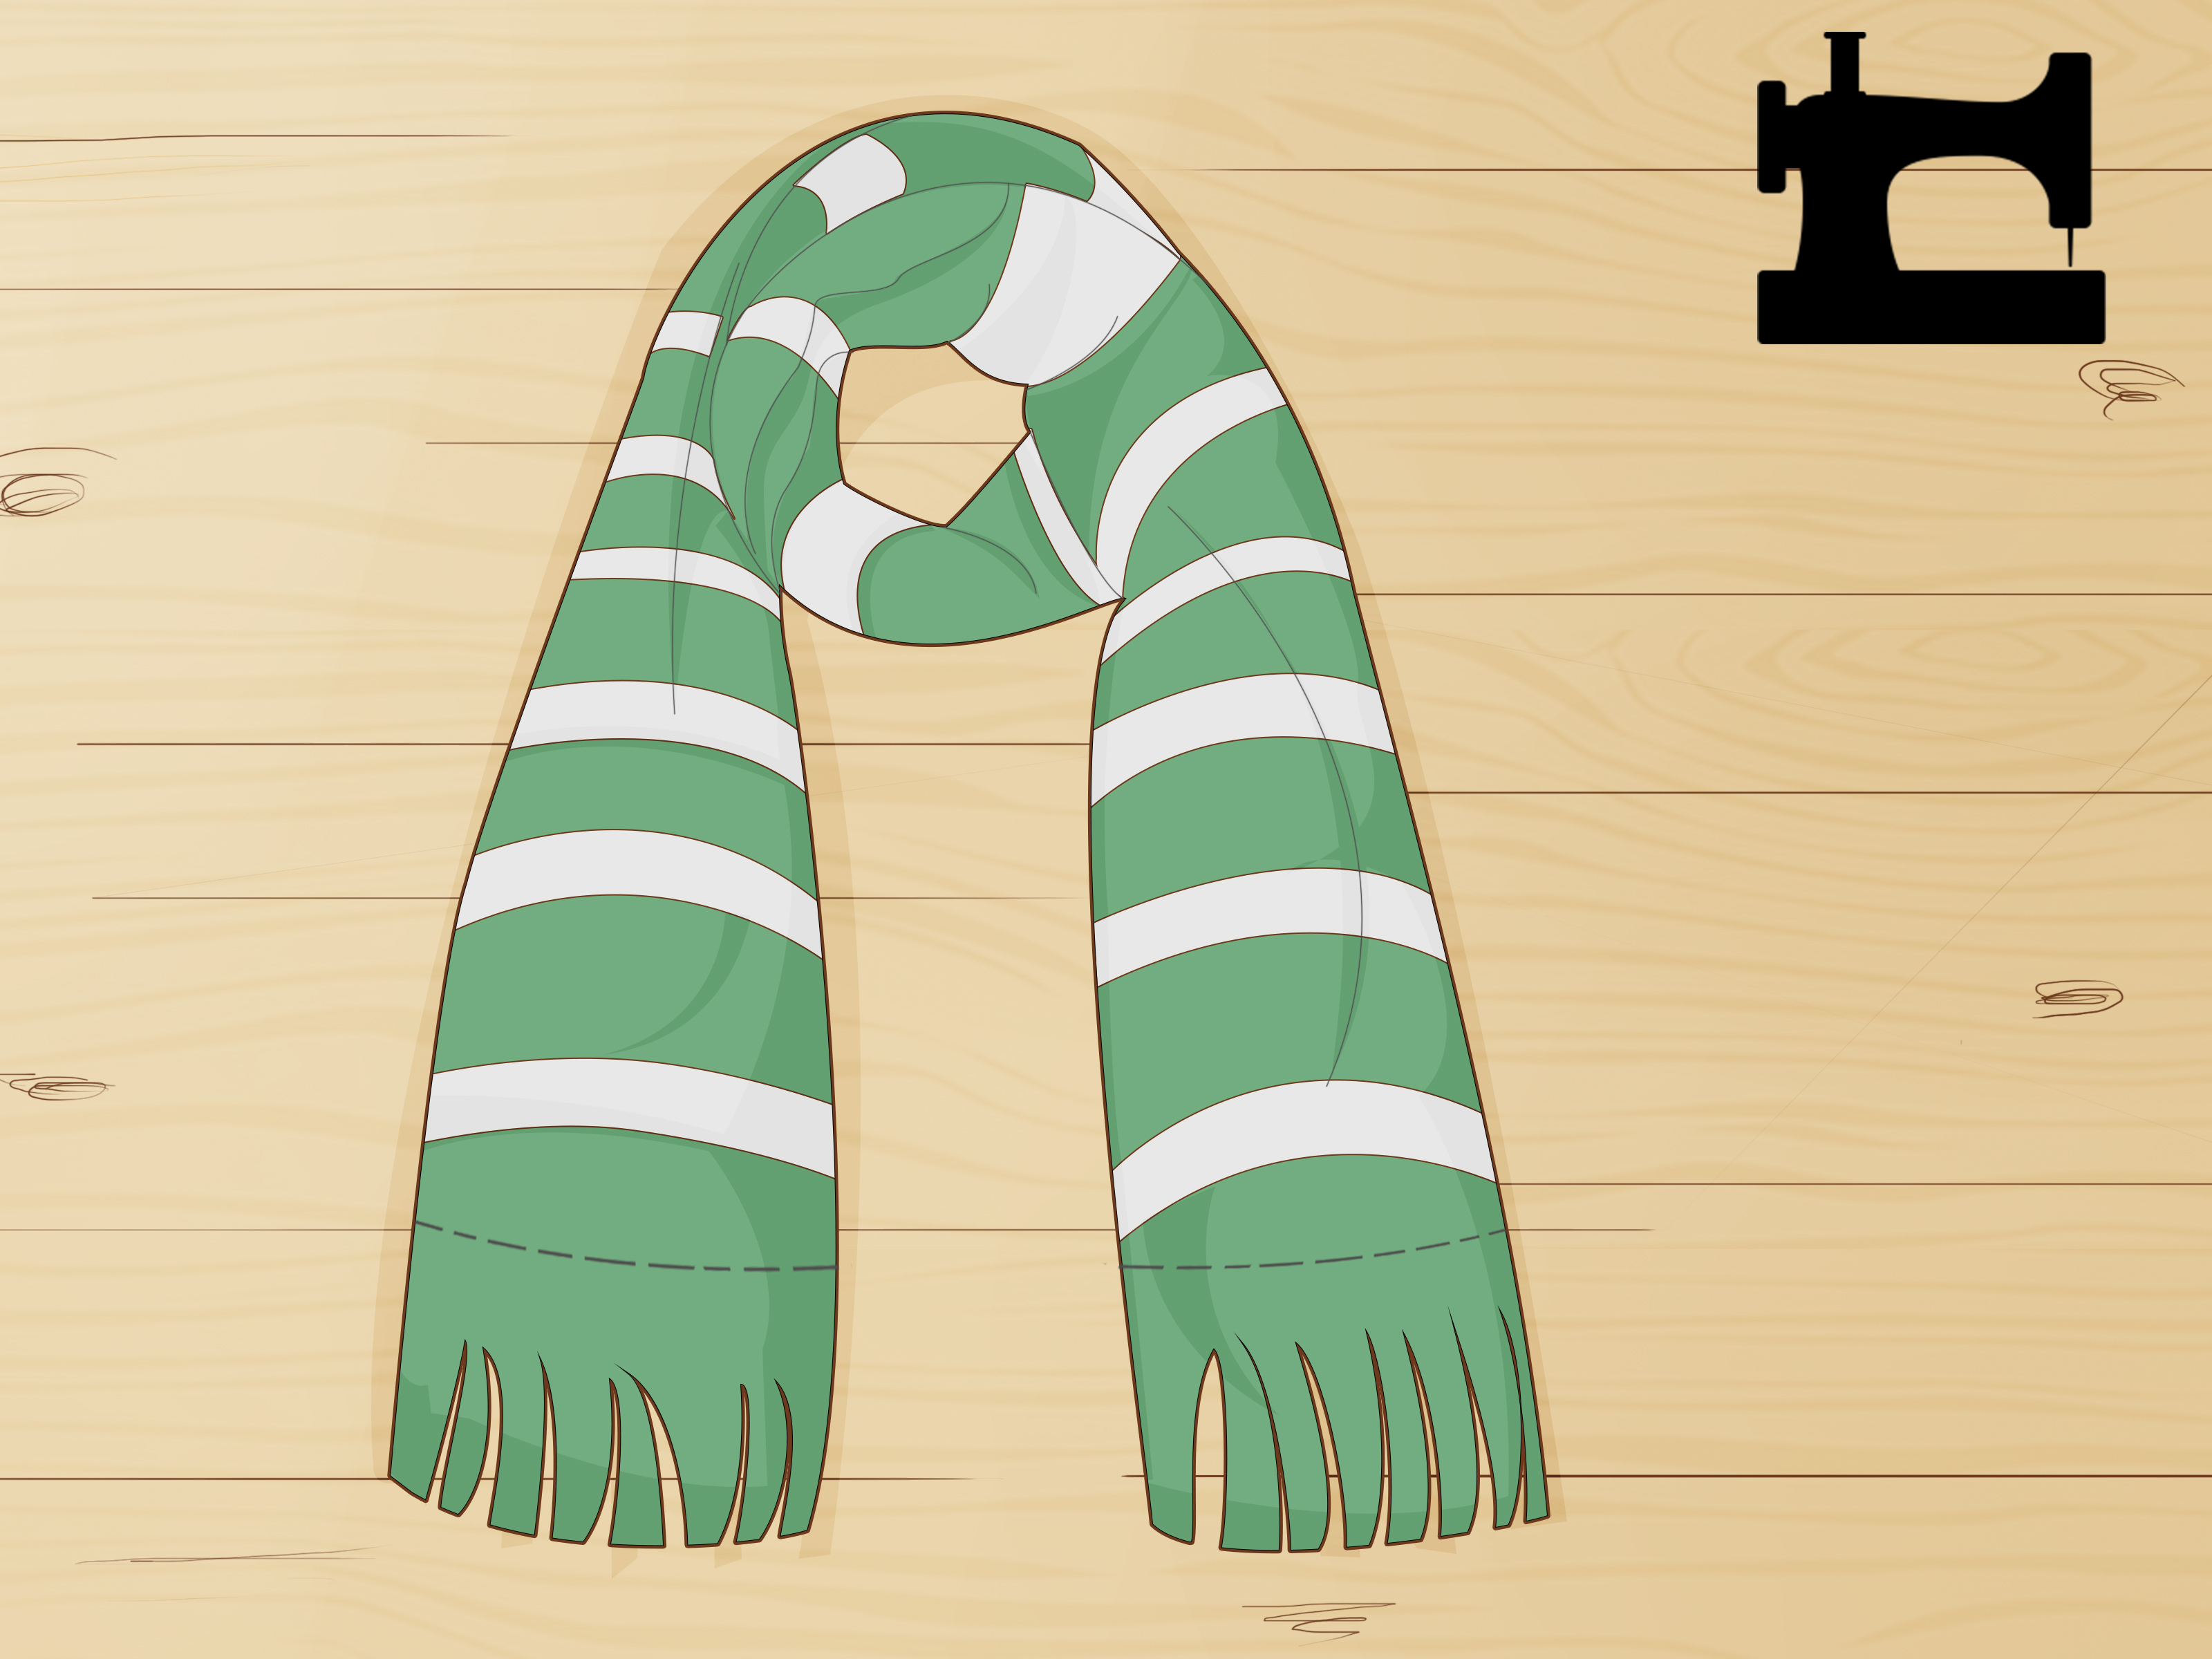 Hogwarts House Scarf Knitting Pattern 3 Ways To Make A Harry Potter Scarf Wikihow